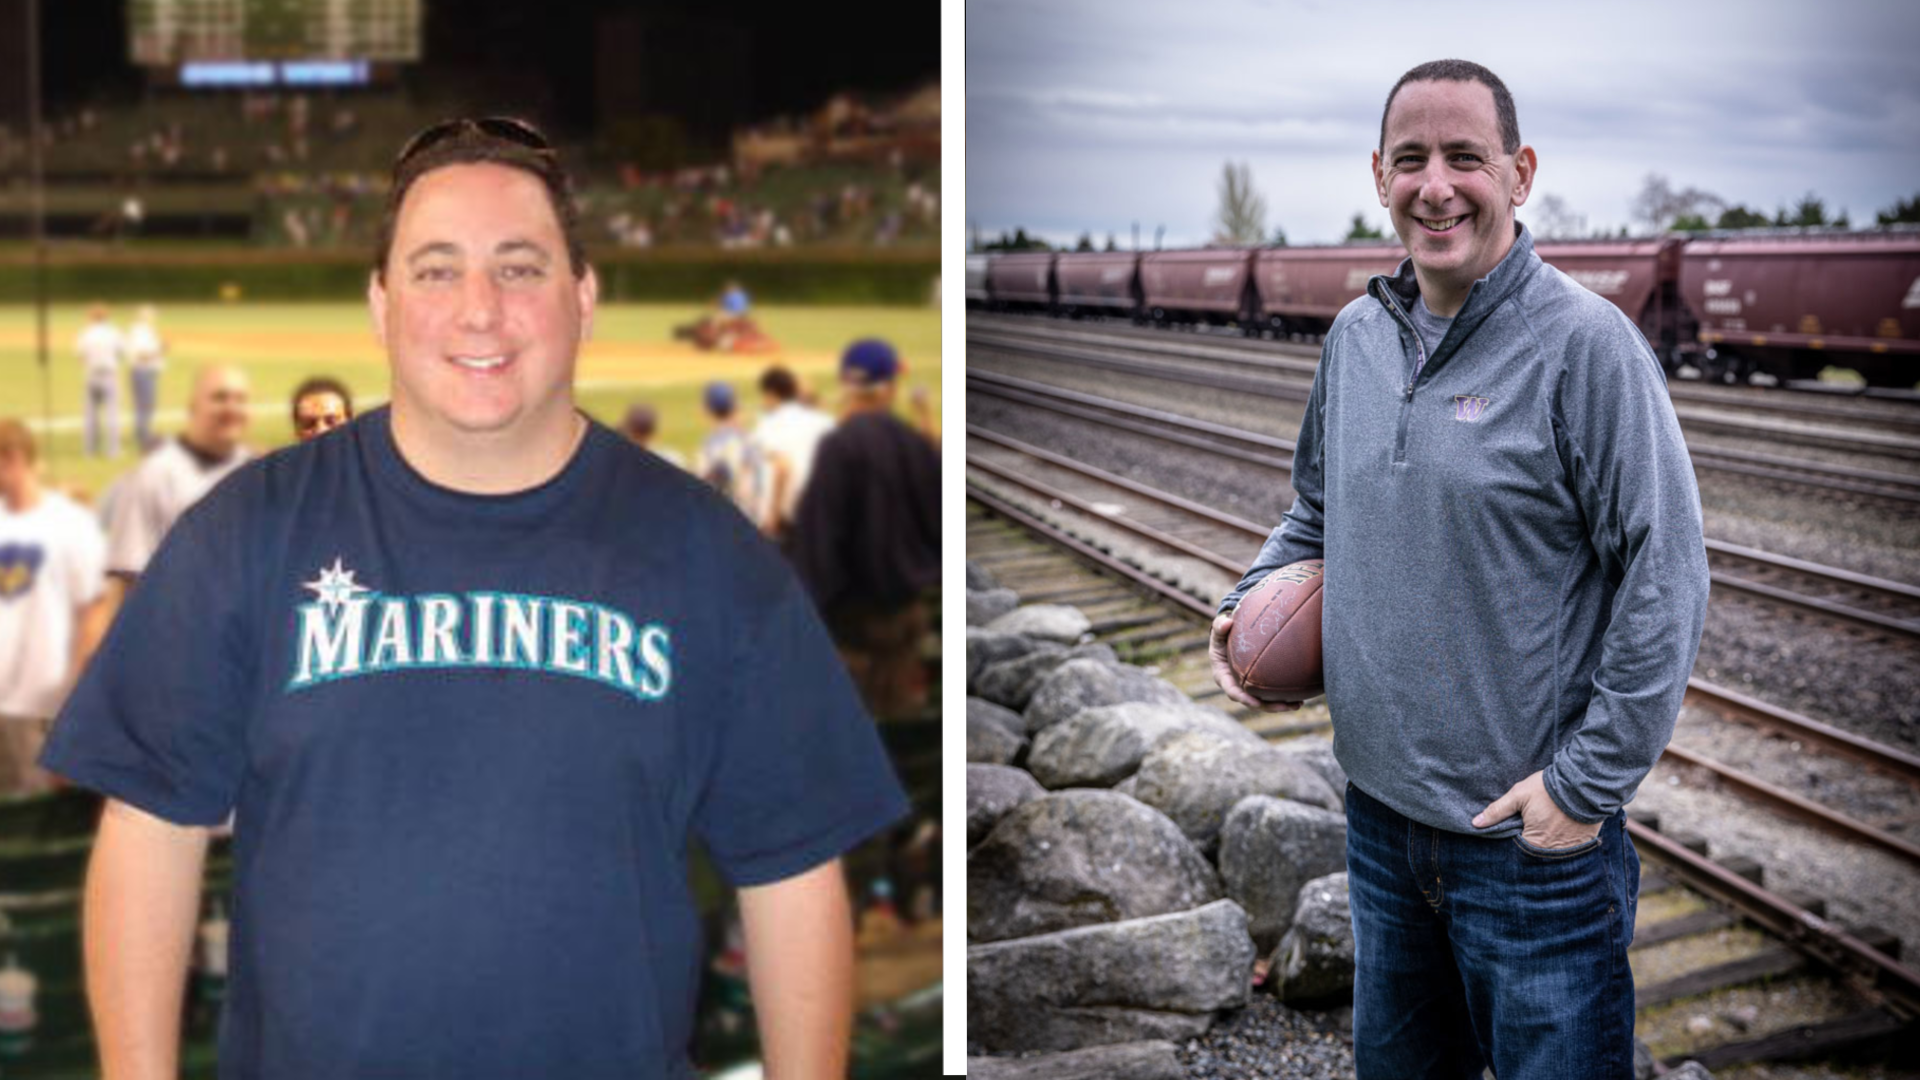 Dave “Softy” Mahle of Seattle's Sports Radio 950 KJR lost 70 pounds 6 years ago... and kept it off! Sponsored by 30/10 Weight Loss for Life.